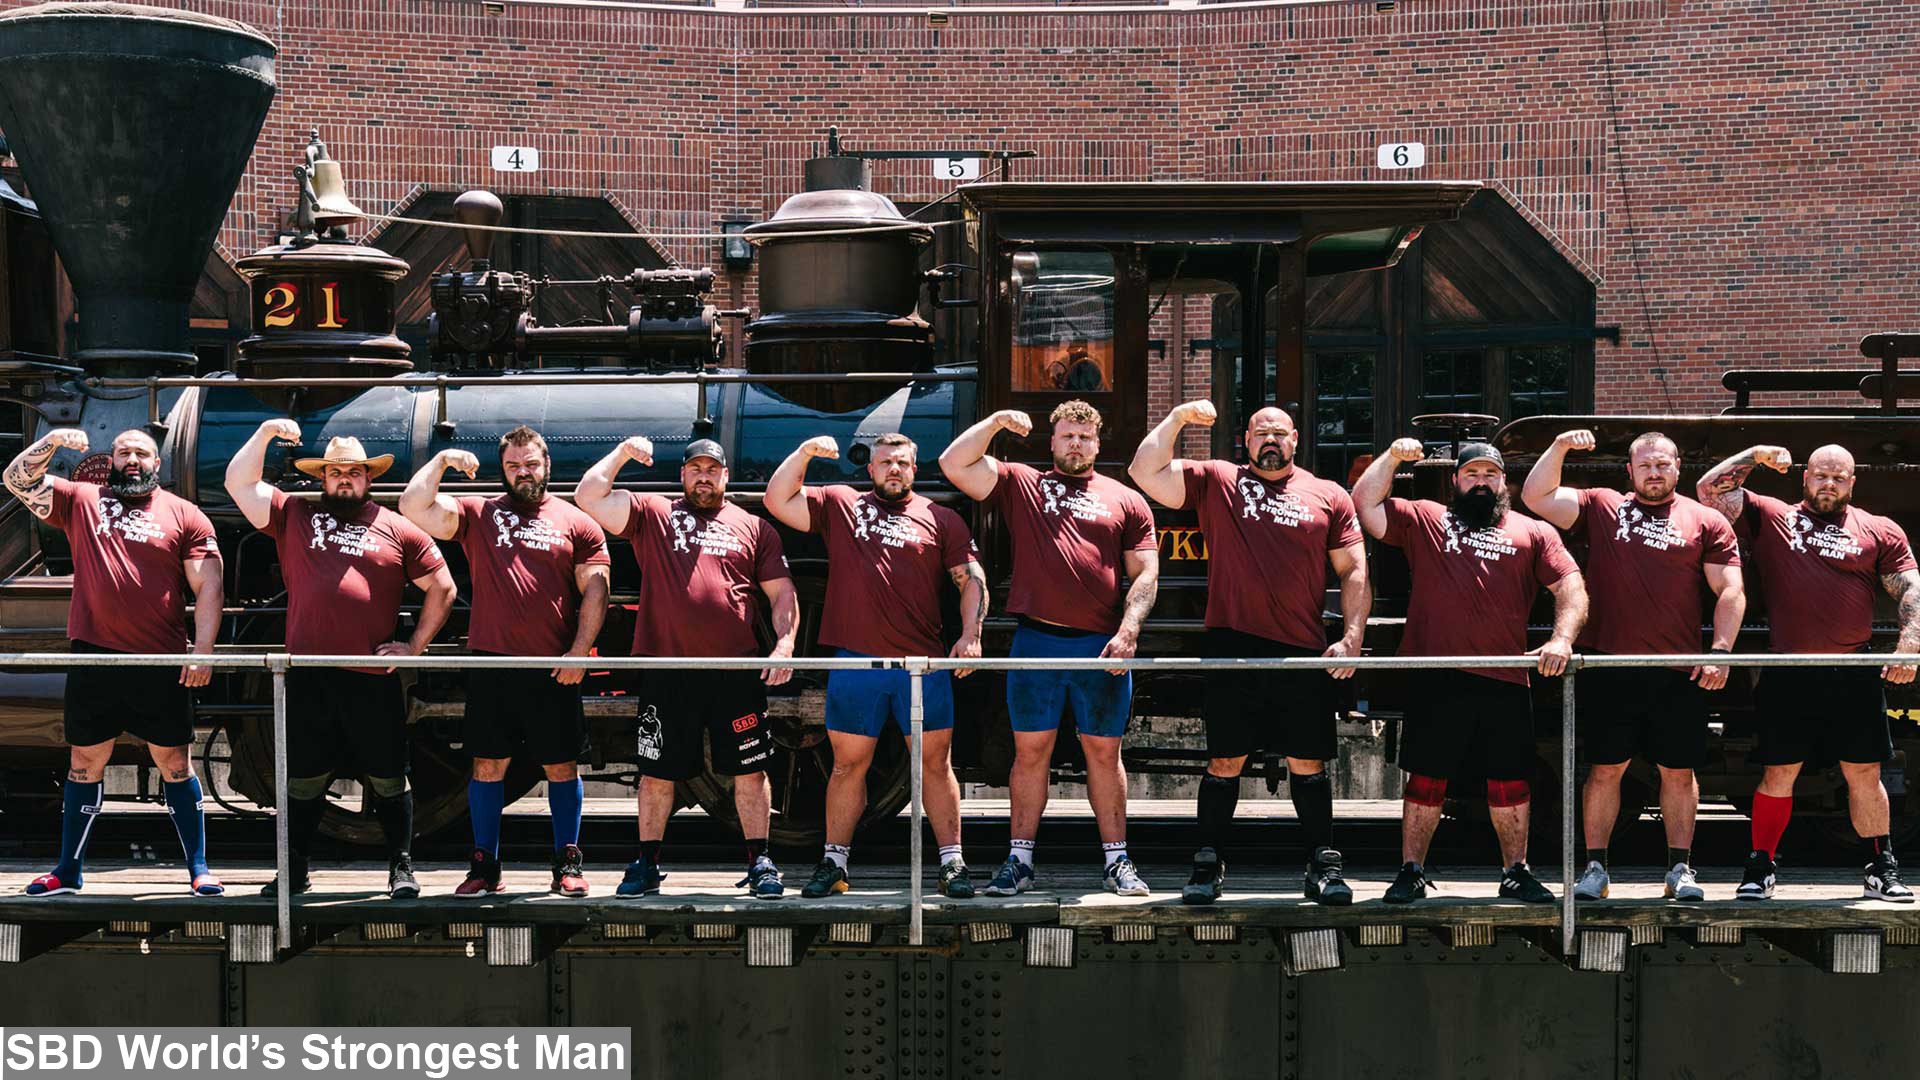 World’s Strongest Man 2021 Final Competitors lined up in a row